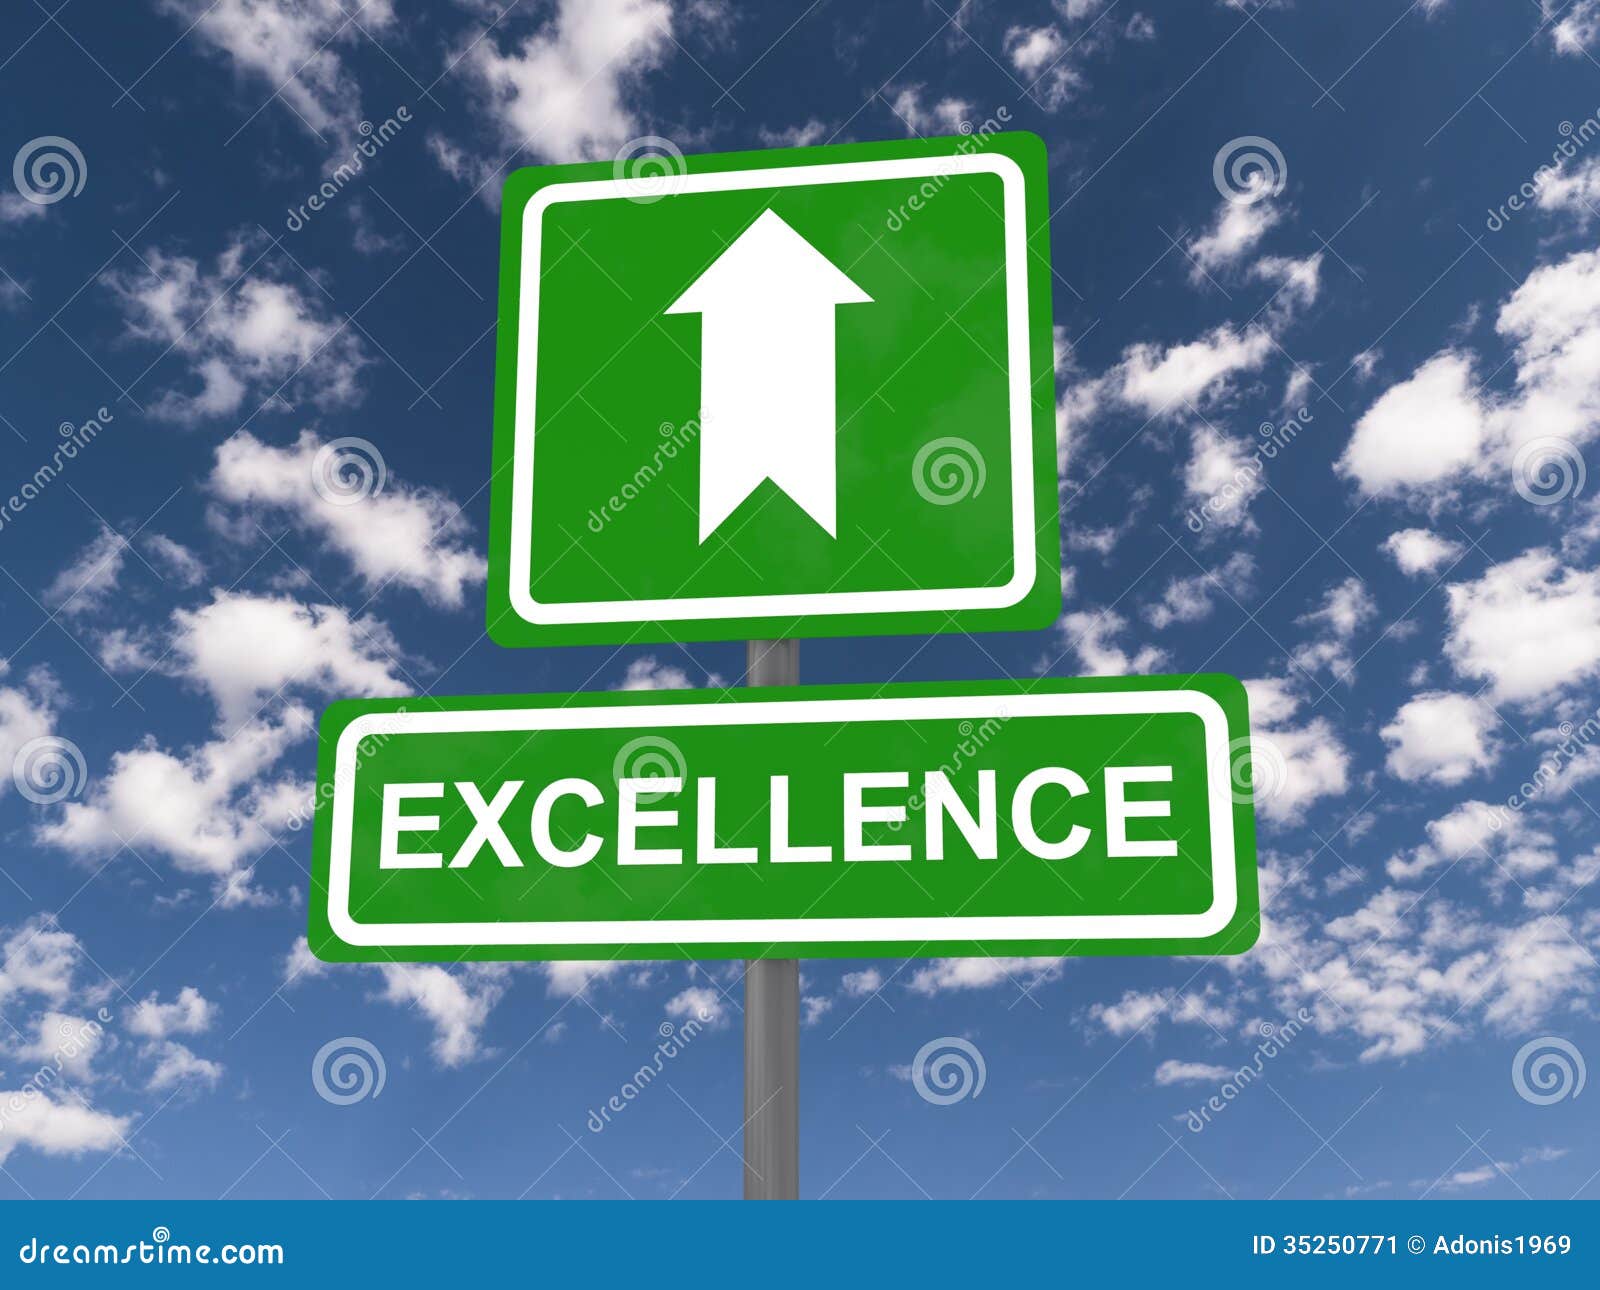 excellence sign with up arrow